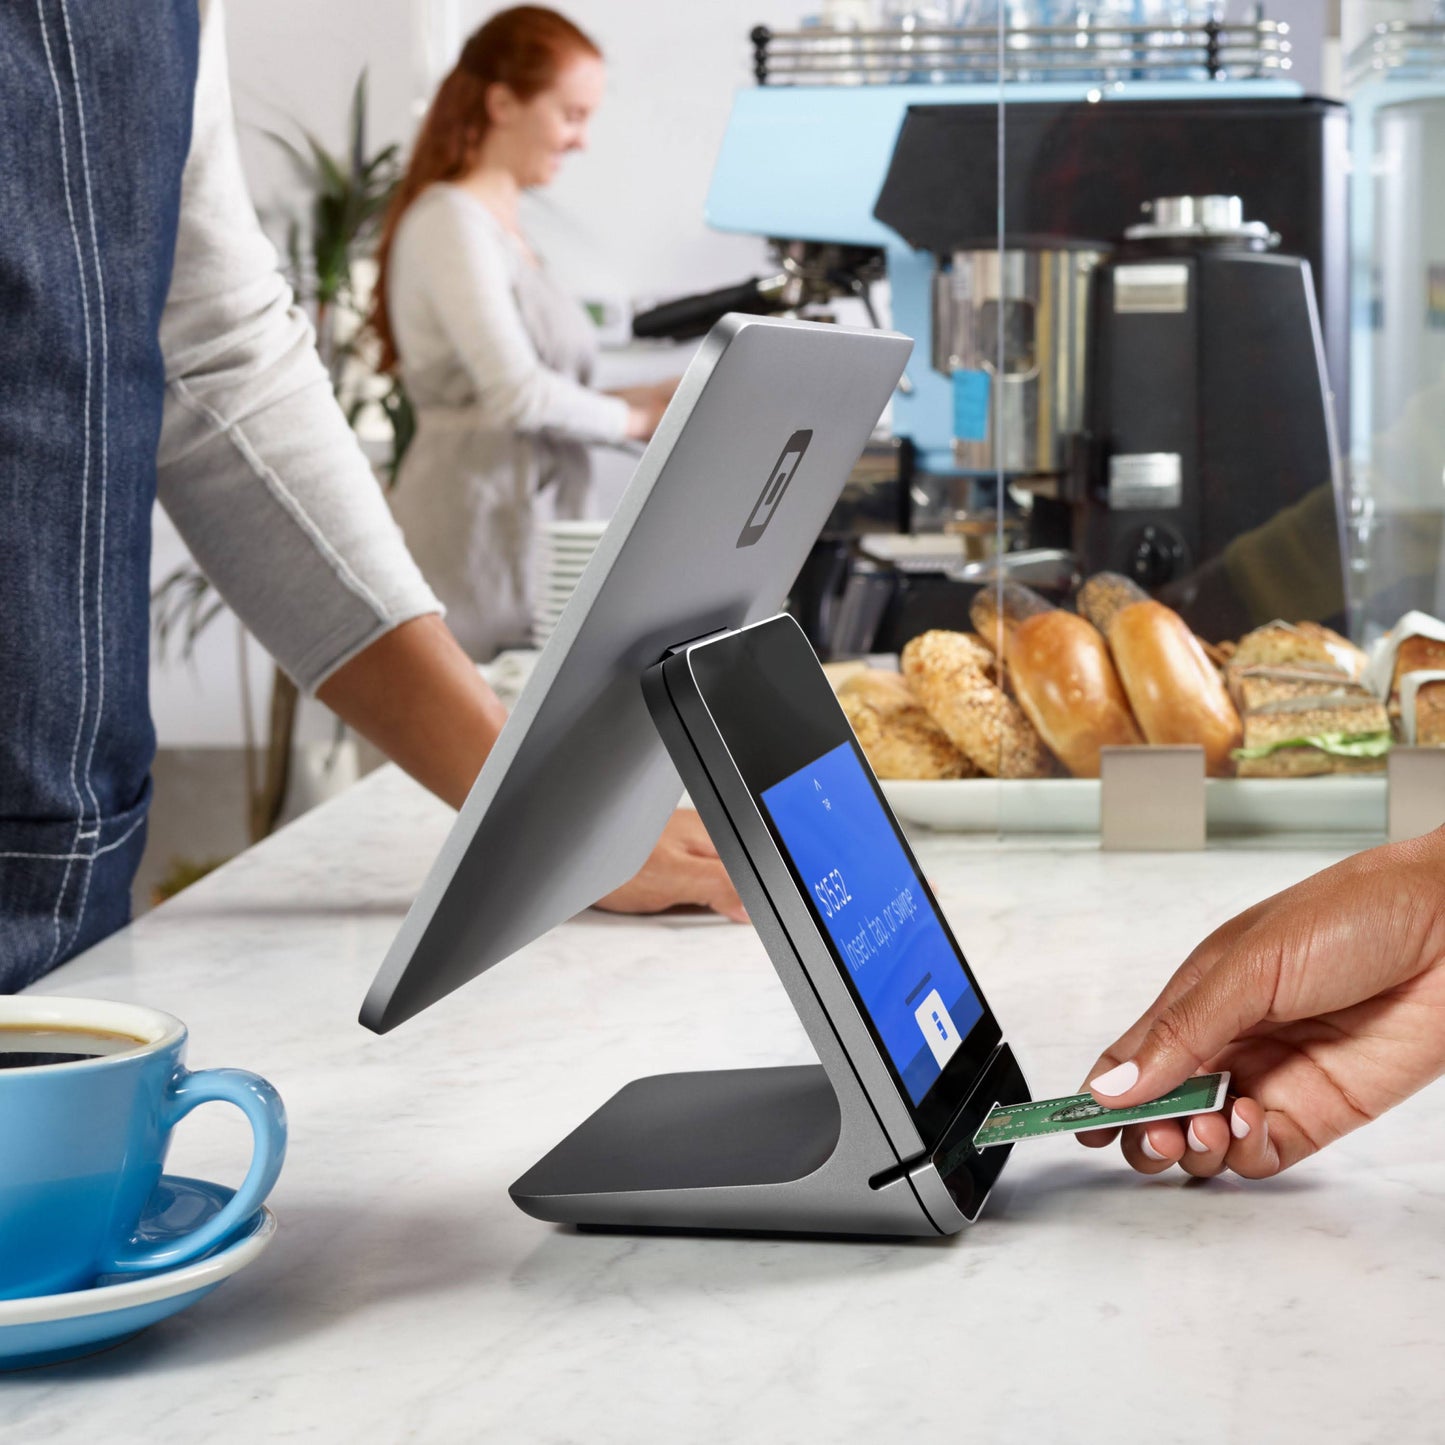 Square Register - Touchscreen Display, Gray - Point of Sale System, Dual Display, Built-In Payment Processing, All-in-One POS, Business Management